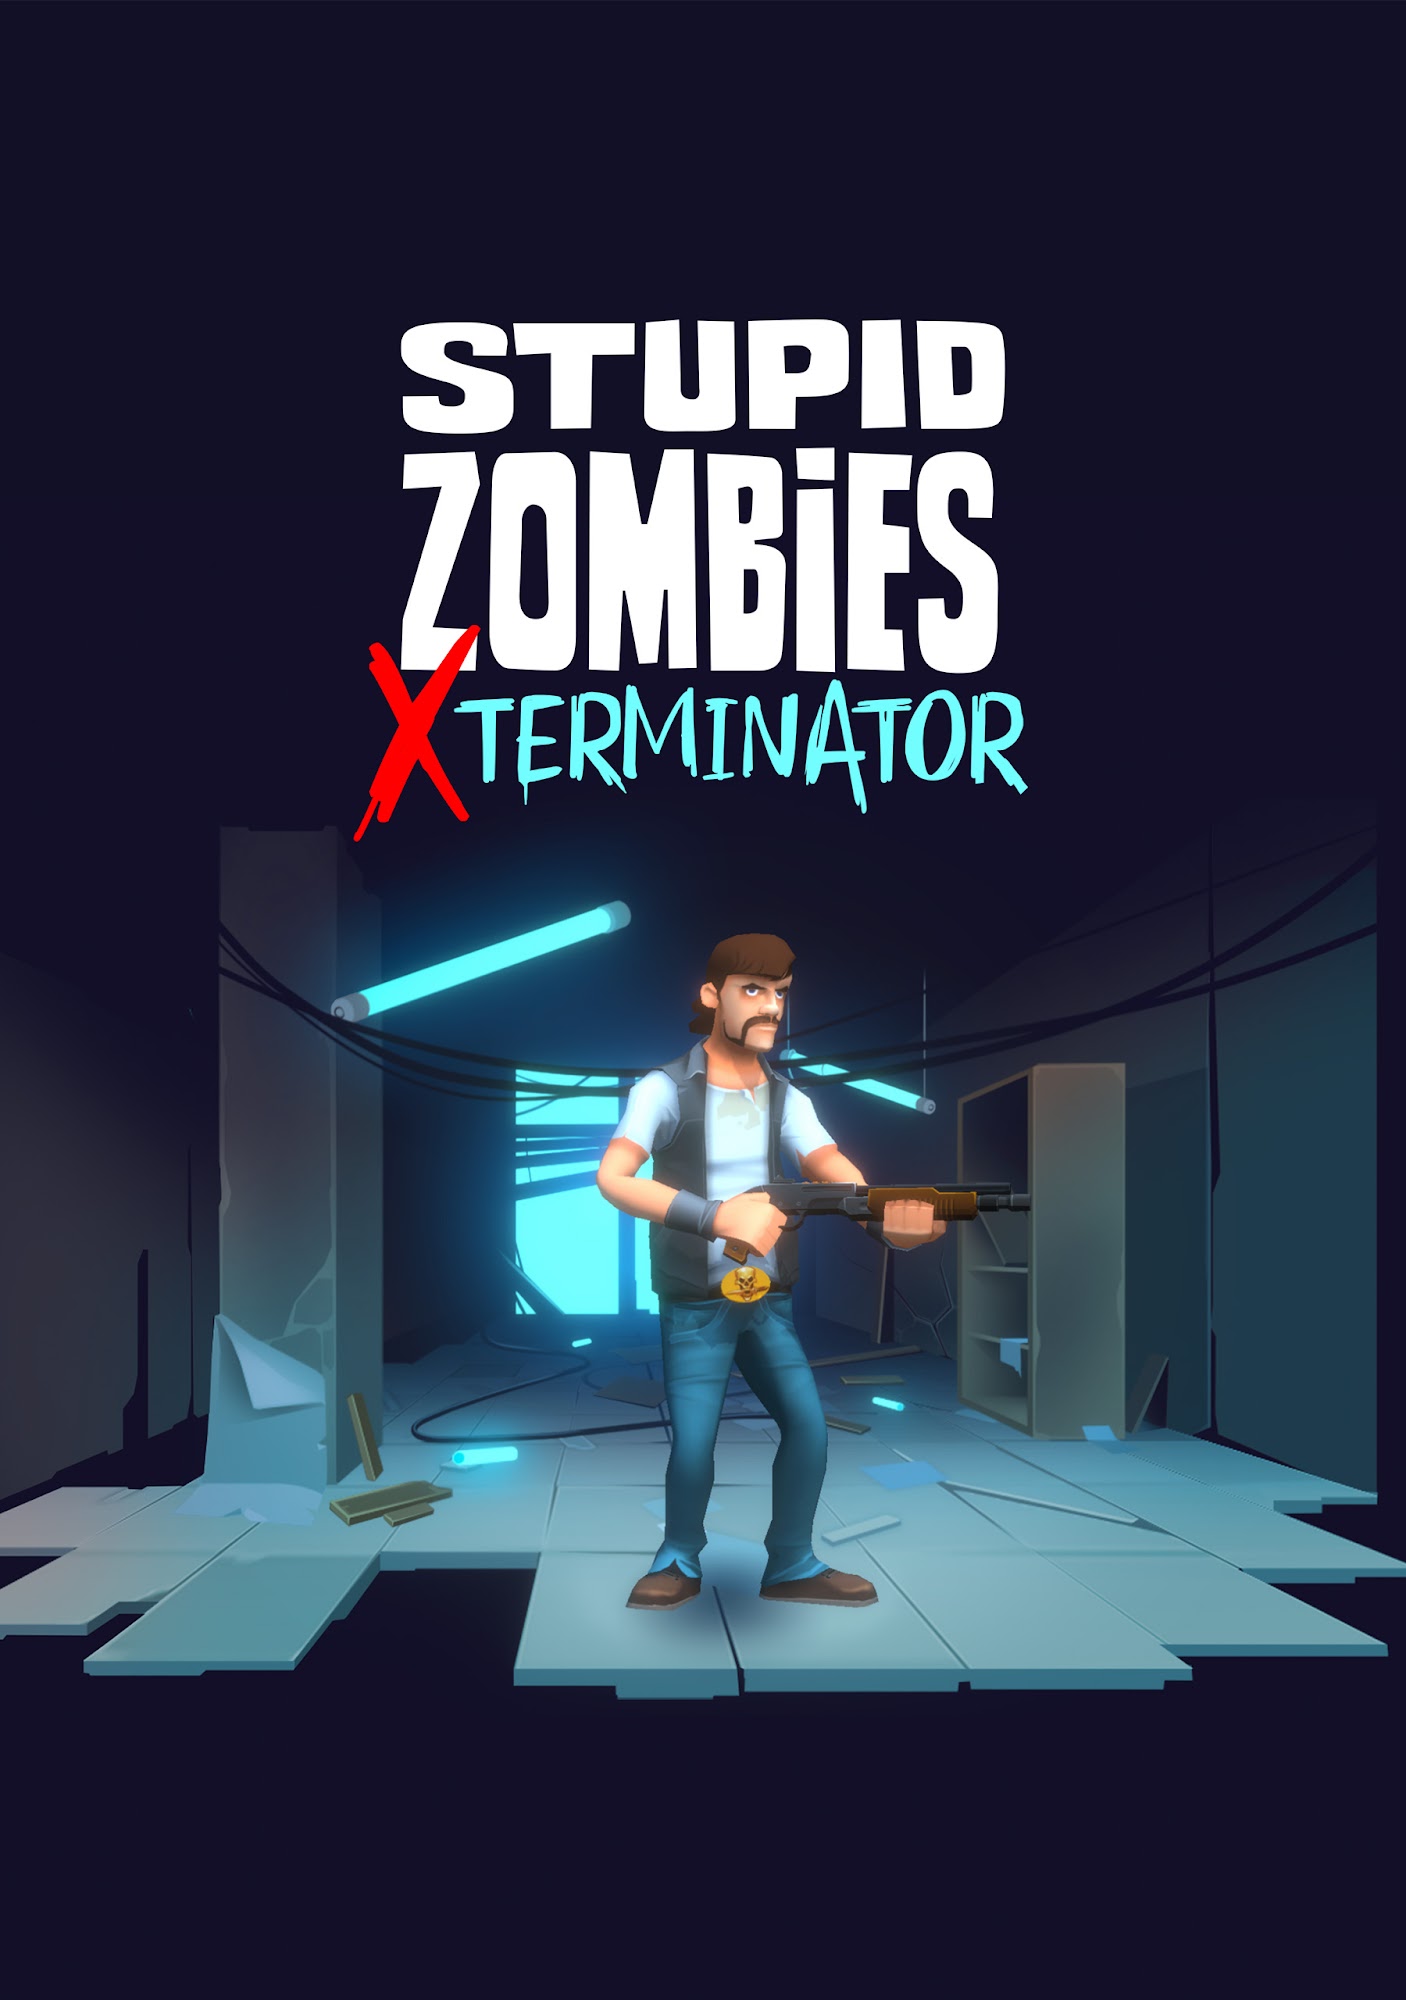 Full version of Android Zombie game apk Stupid Zombies Exterminator for tablet and phone.